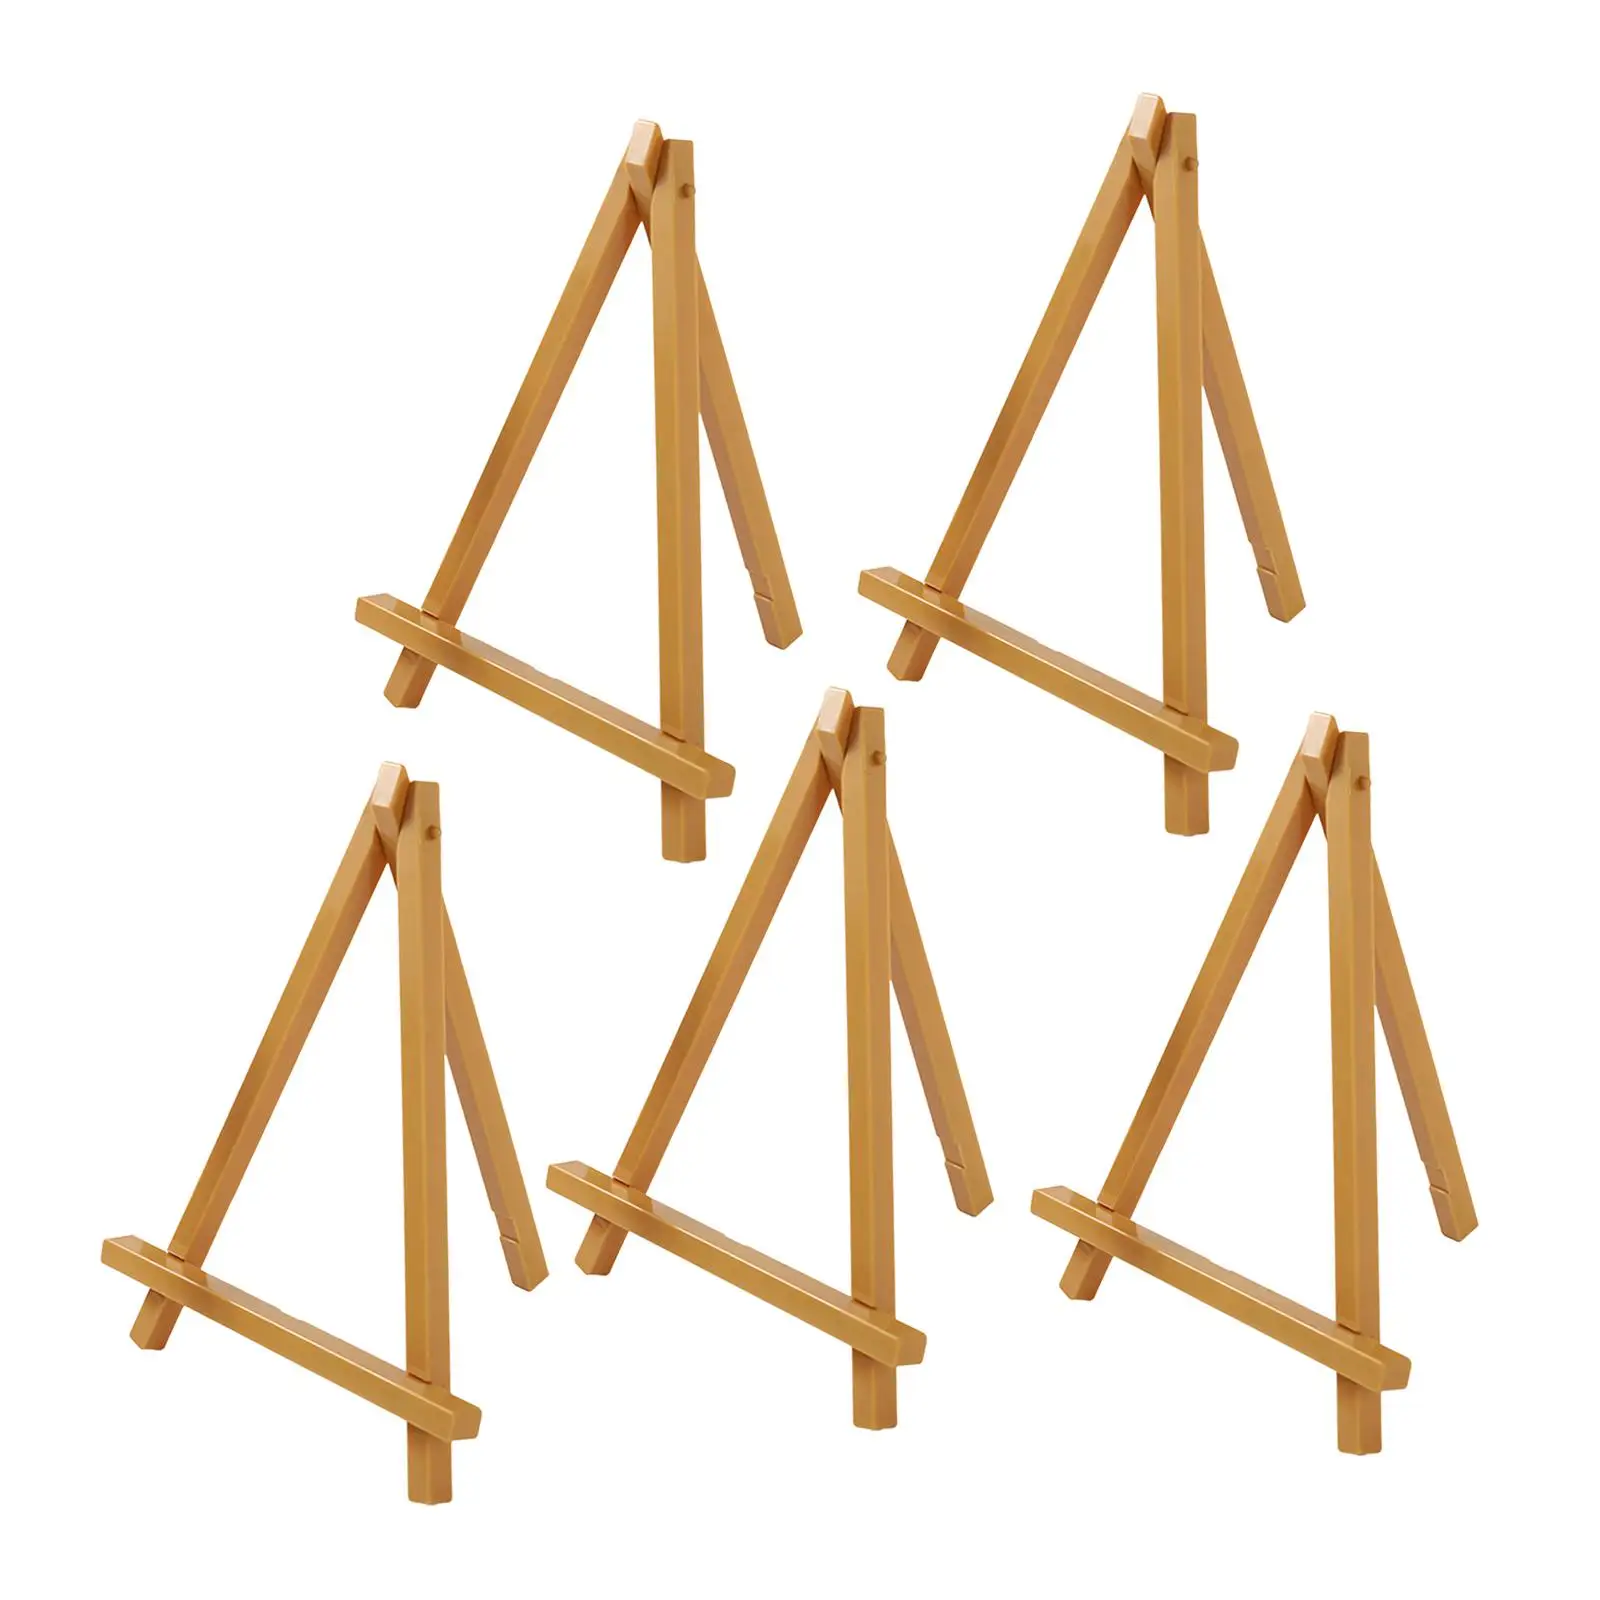 5Pcs Mini Wood Easel Frame Painting Art Easel Telescoping Easel Tripod Home Children Painting Craft Display Tabletop Easel Stand